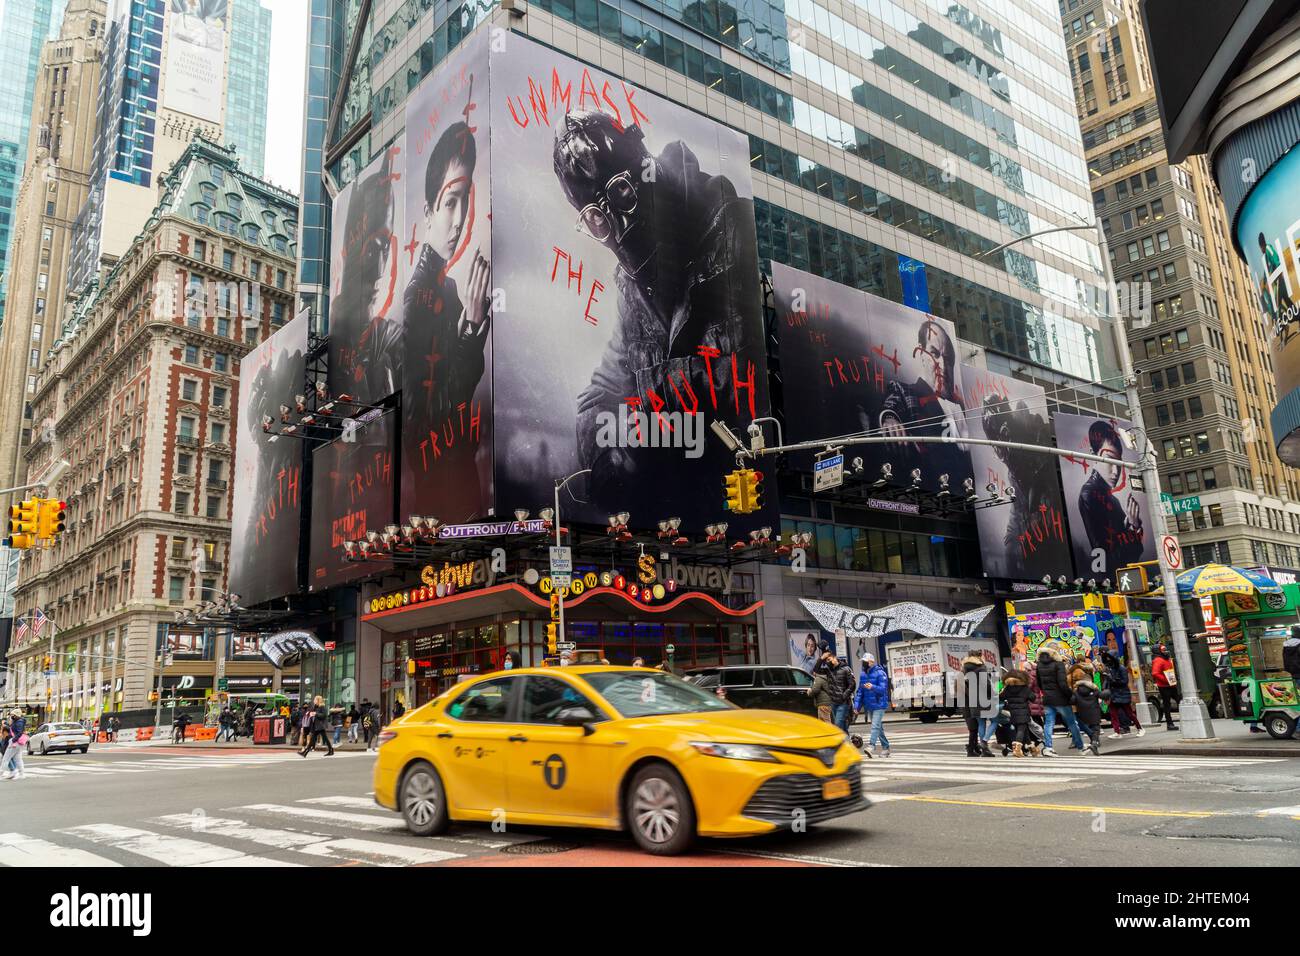 Advertising for the Warner Bros. PicturesÕ  ÒThe BatmanÓ film is seen in Times Square in New York on Wednesday, February 16, 2022. The film, starring Robert Pattinson, is scheduled to be released in the U.S. on March 4, 2022. (© Richard B. Levine) Stock Photo